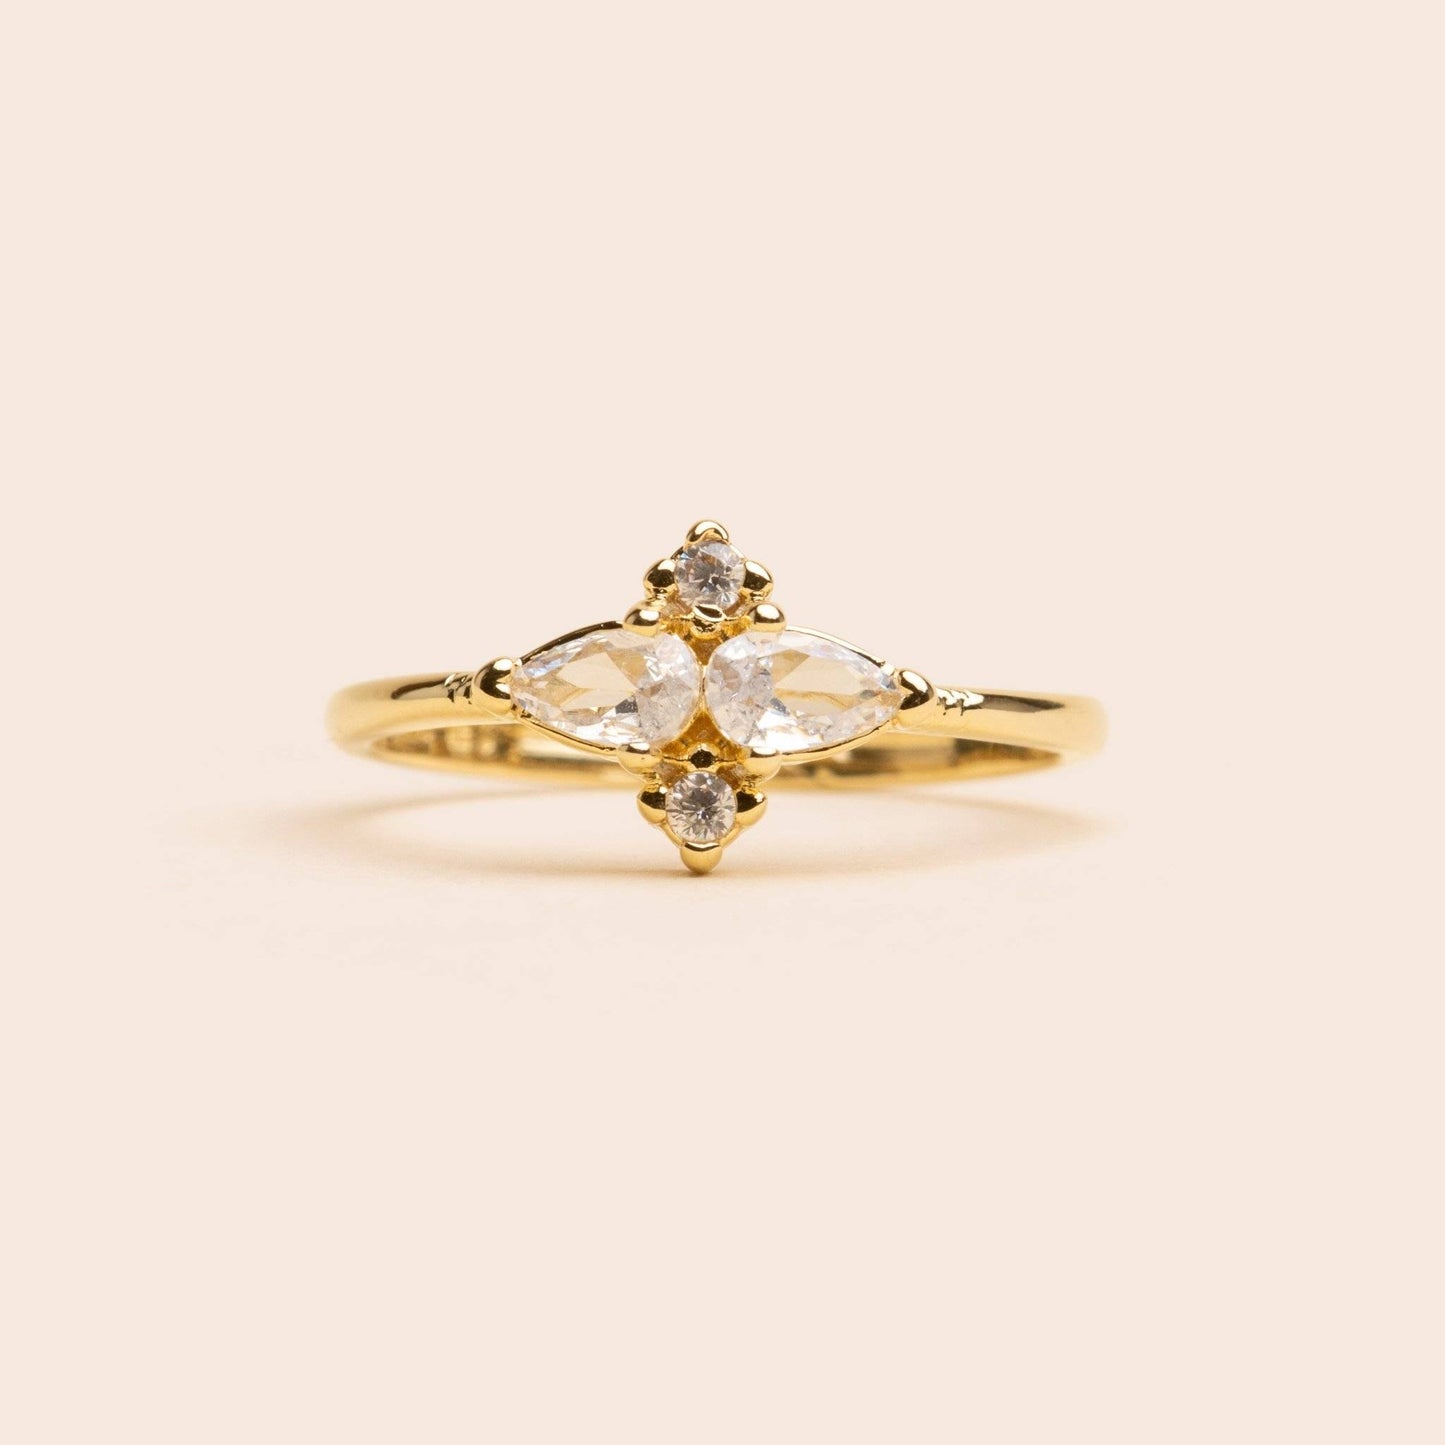 Gold Filled Rings: A Timeless Symbol of Elegance and Class